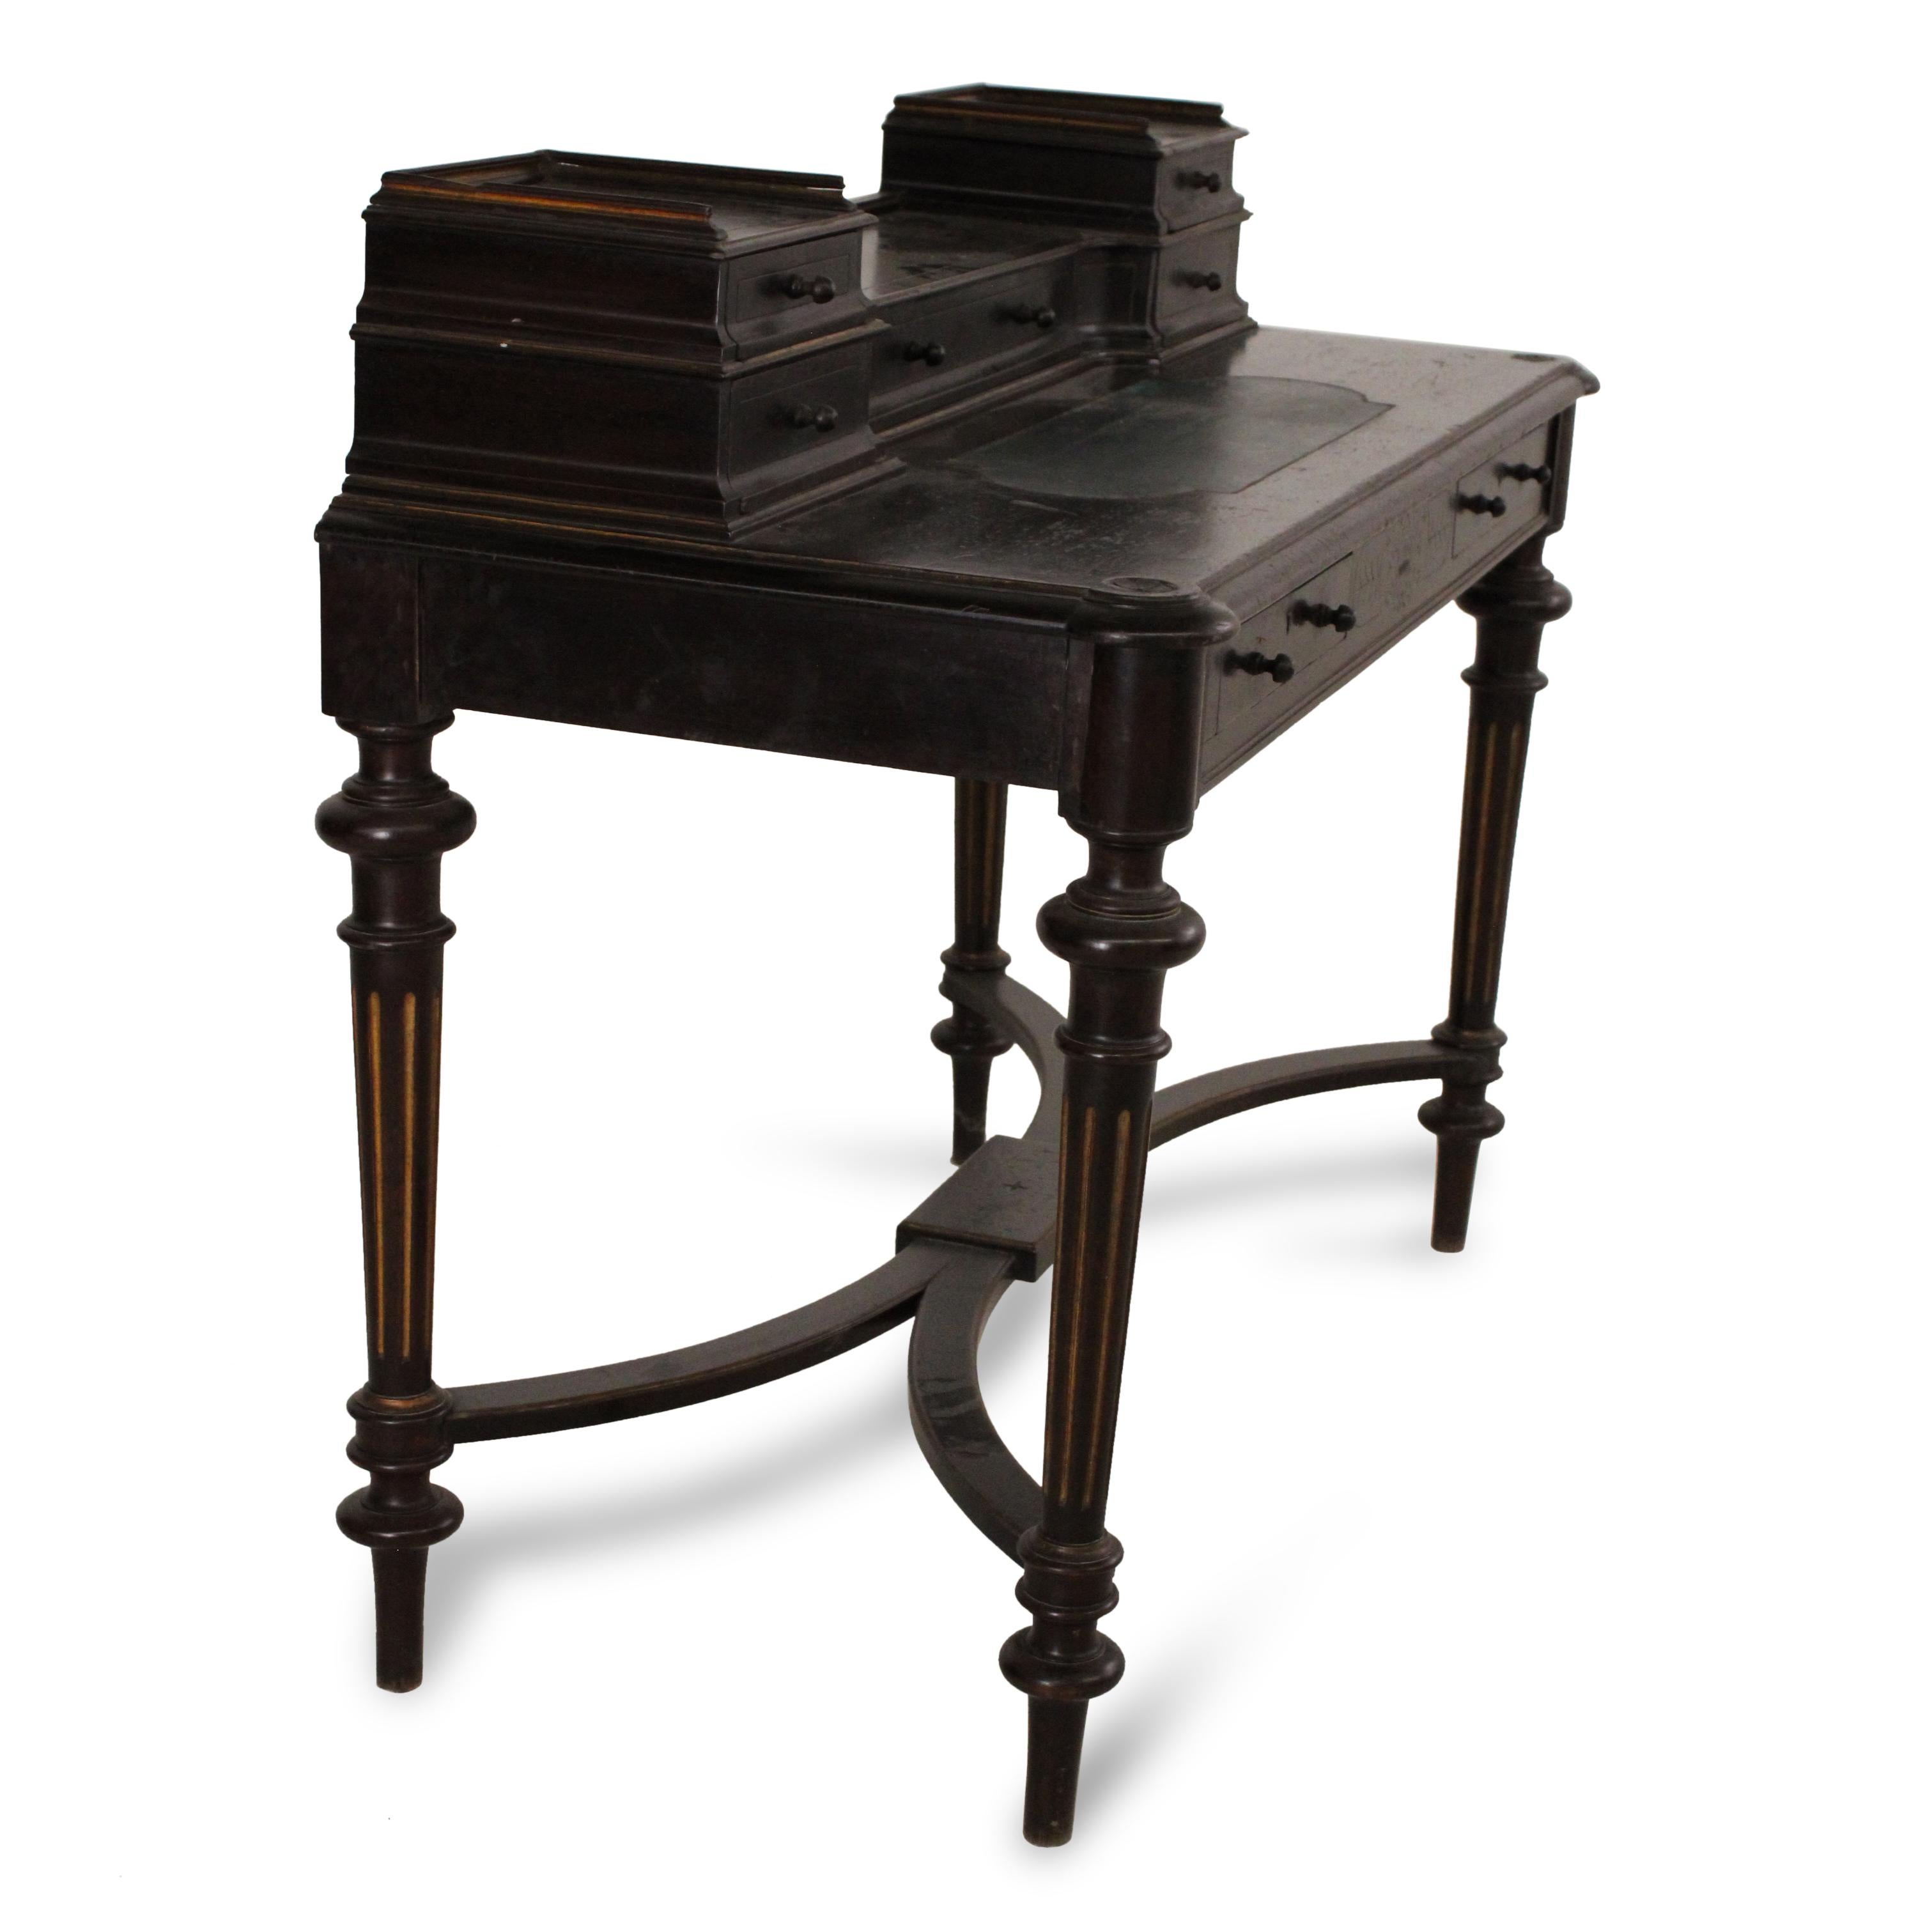 Anglo-Indian 19th Century Desk From an Indian Palace